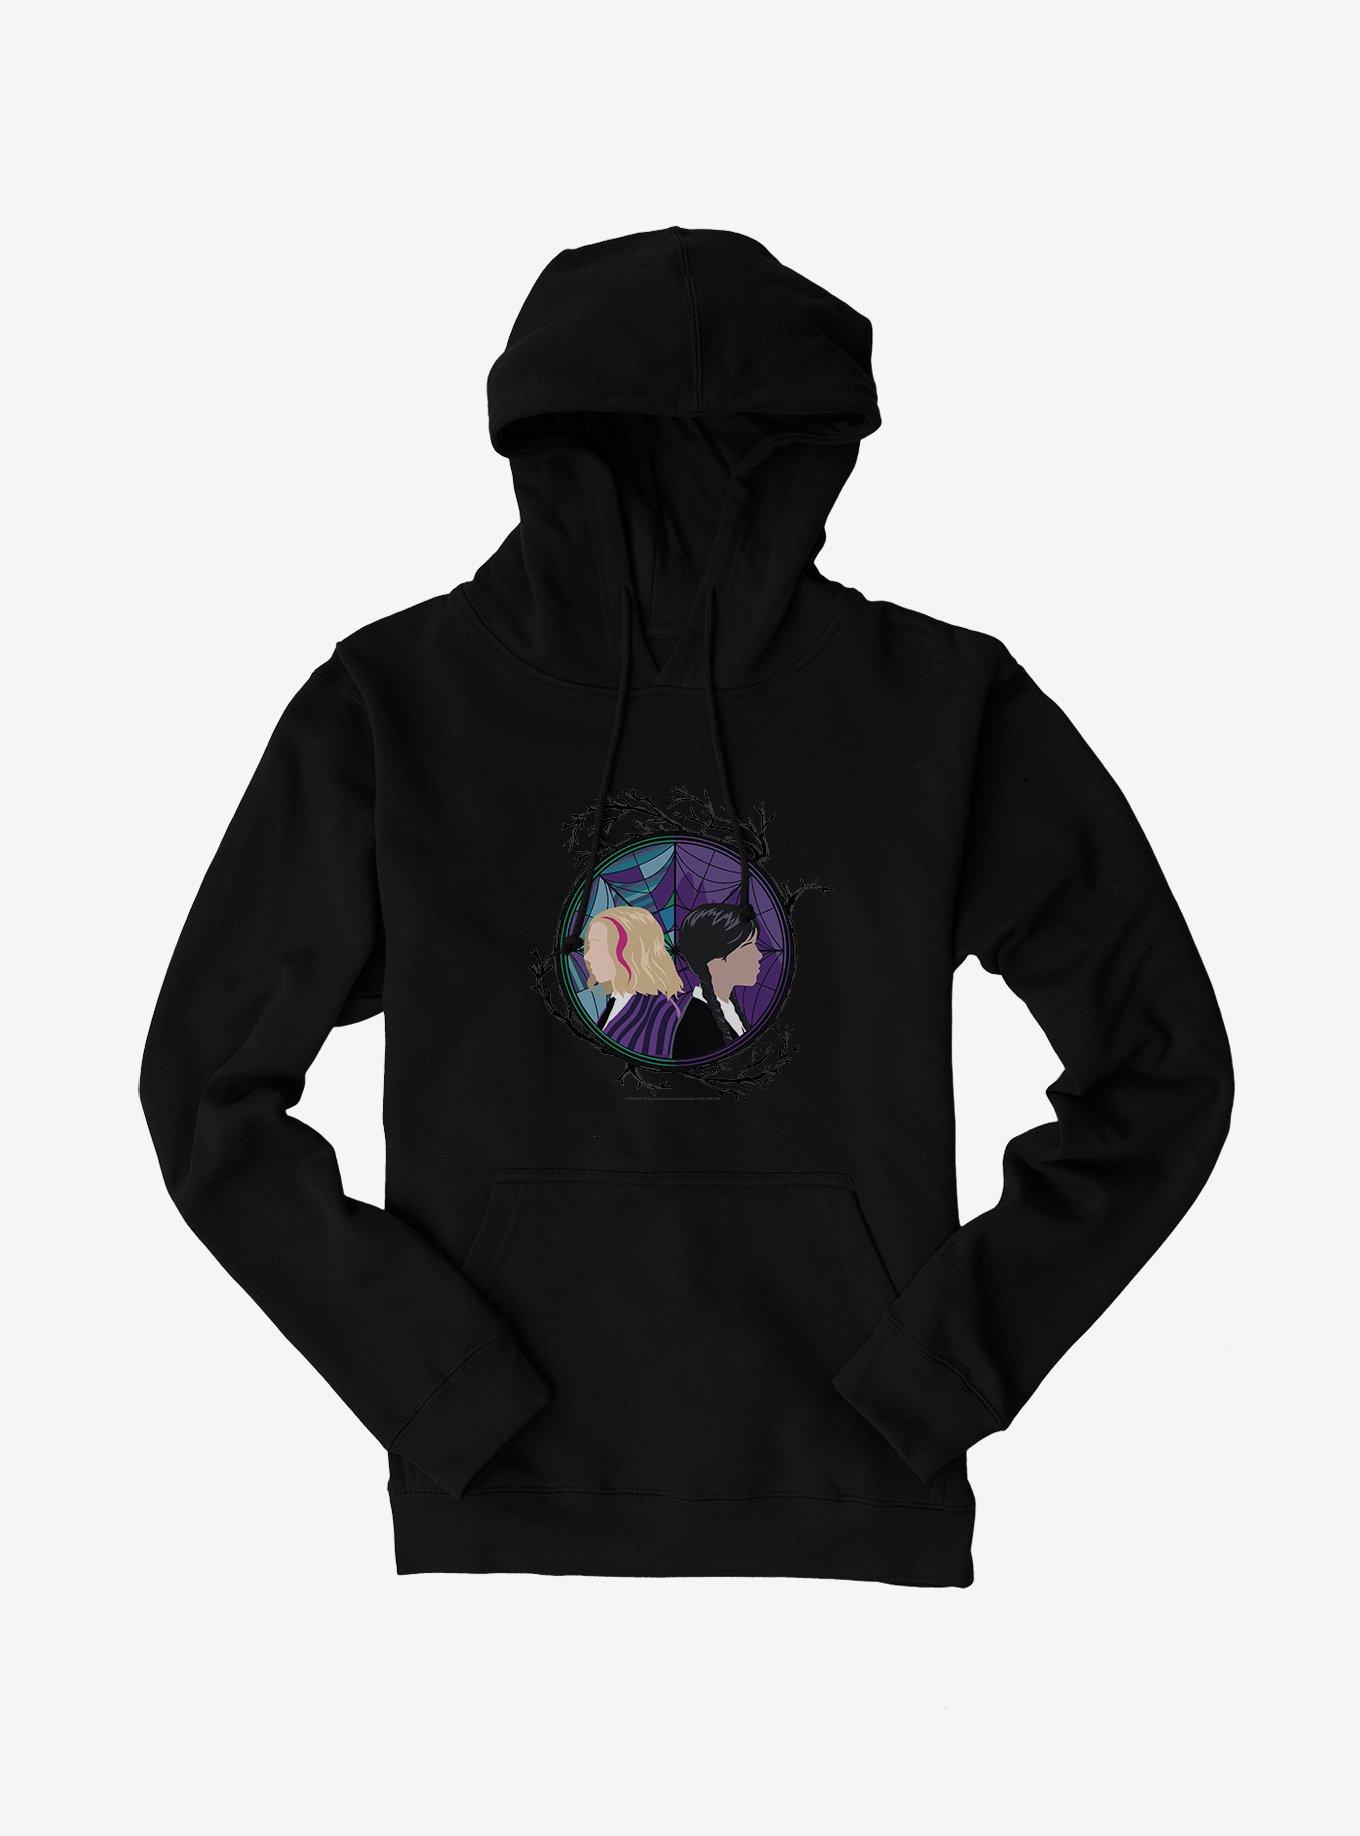 Wednesday TV Series Enid And Wednesday Portrait Hoodie, , hi-res